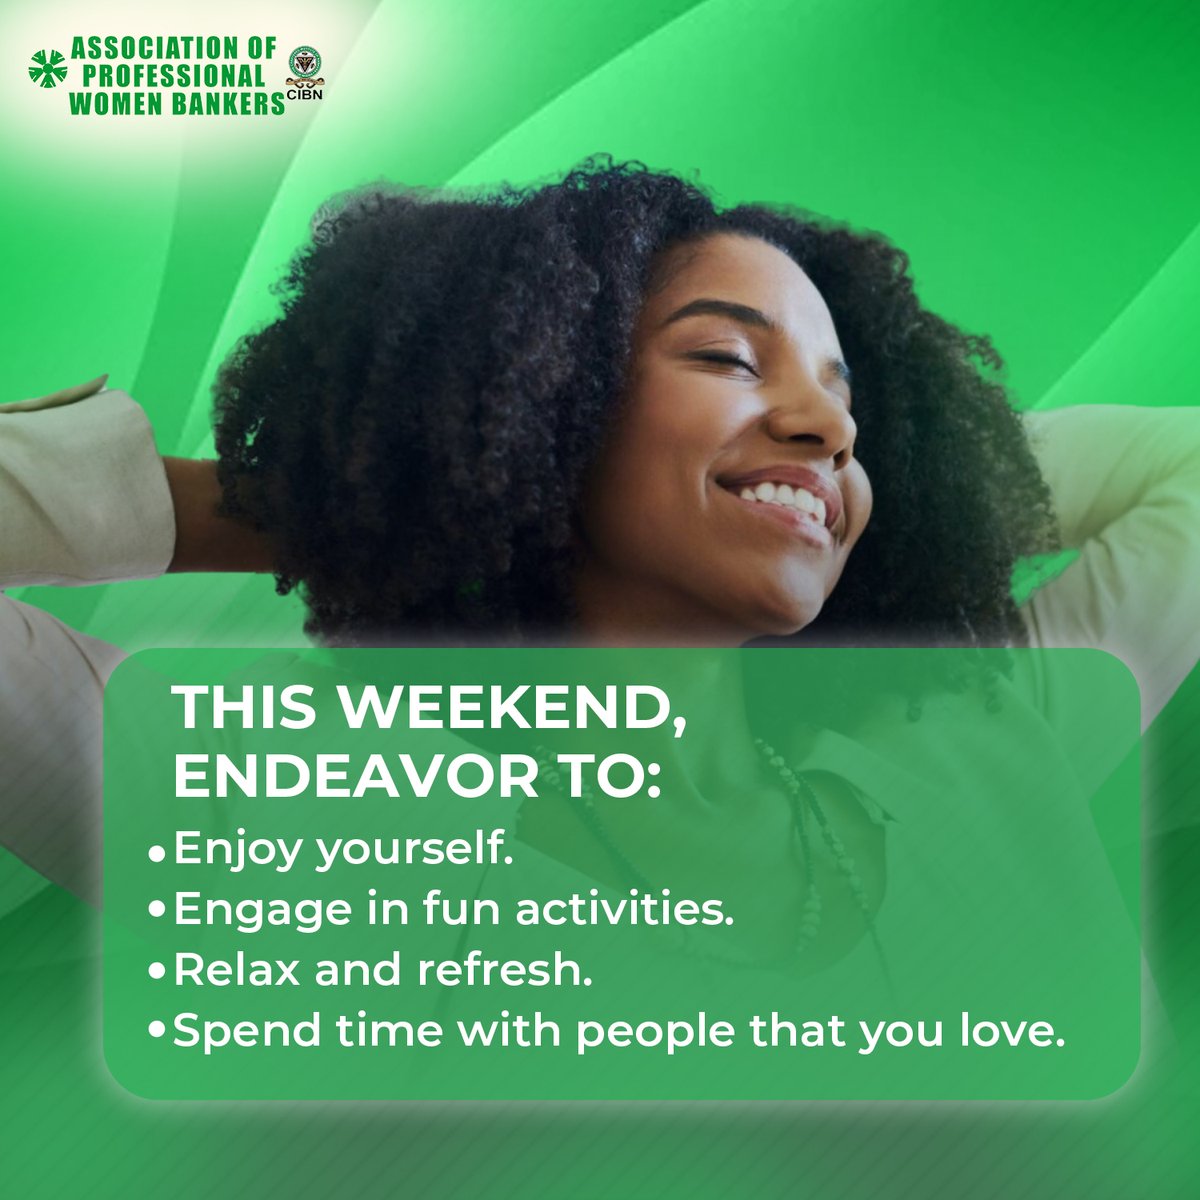 What are your plans this weekend? Make sure to do something you love. 

#APWB #APWBNigeria #WeekendBreak  #WeekendPlans #WeekendPlan #WeekendRelaxing #WeekendReading #WeekendActivity